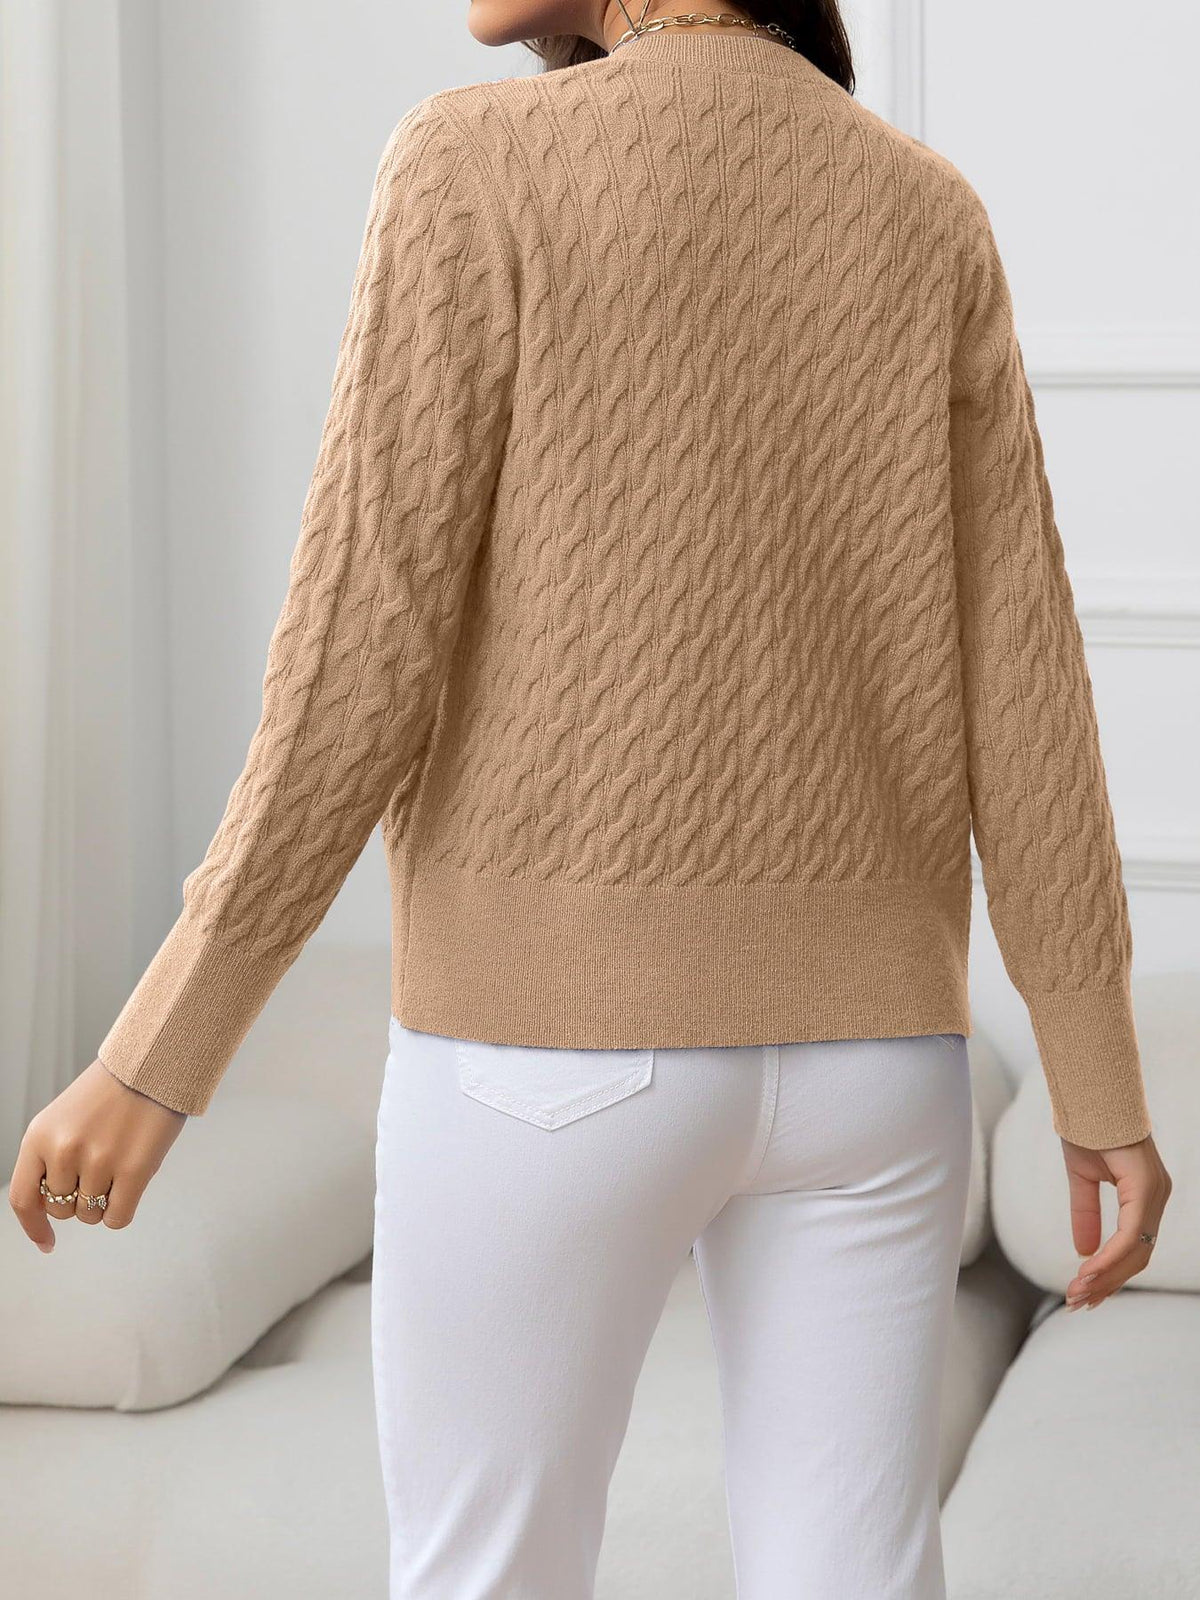 Round Neck Cable-Knit Buttoned Knit Top - Crazy Like a Daisy Boutique #